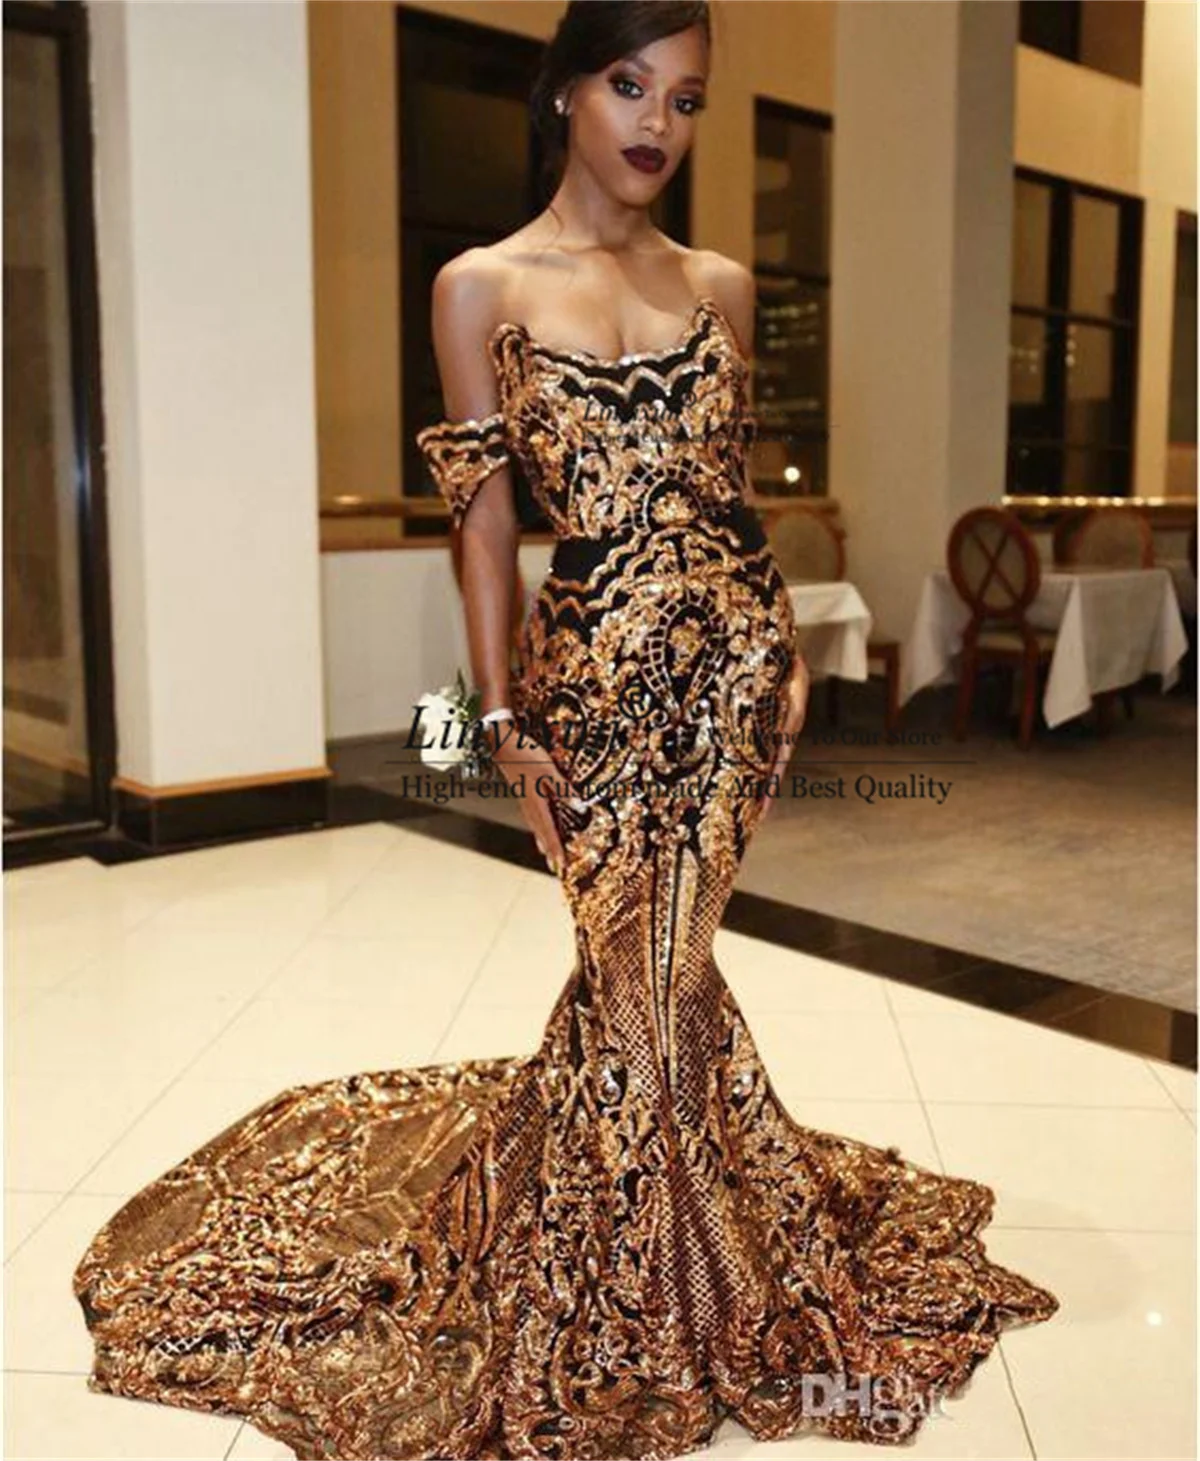 

Sparkly Luxury Gold Black Mermaid Prom Dresses Off Shoulder Sexy African Evening Gowns Sequin Lace Court Train Robes de soirée